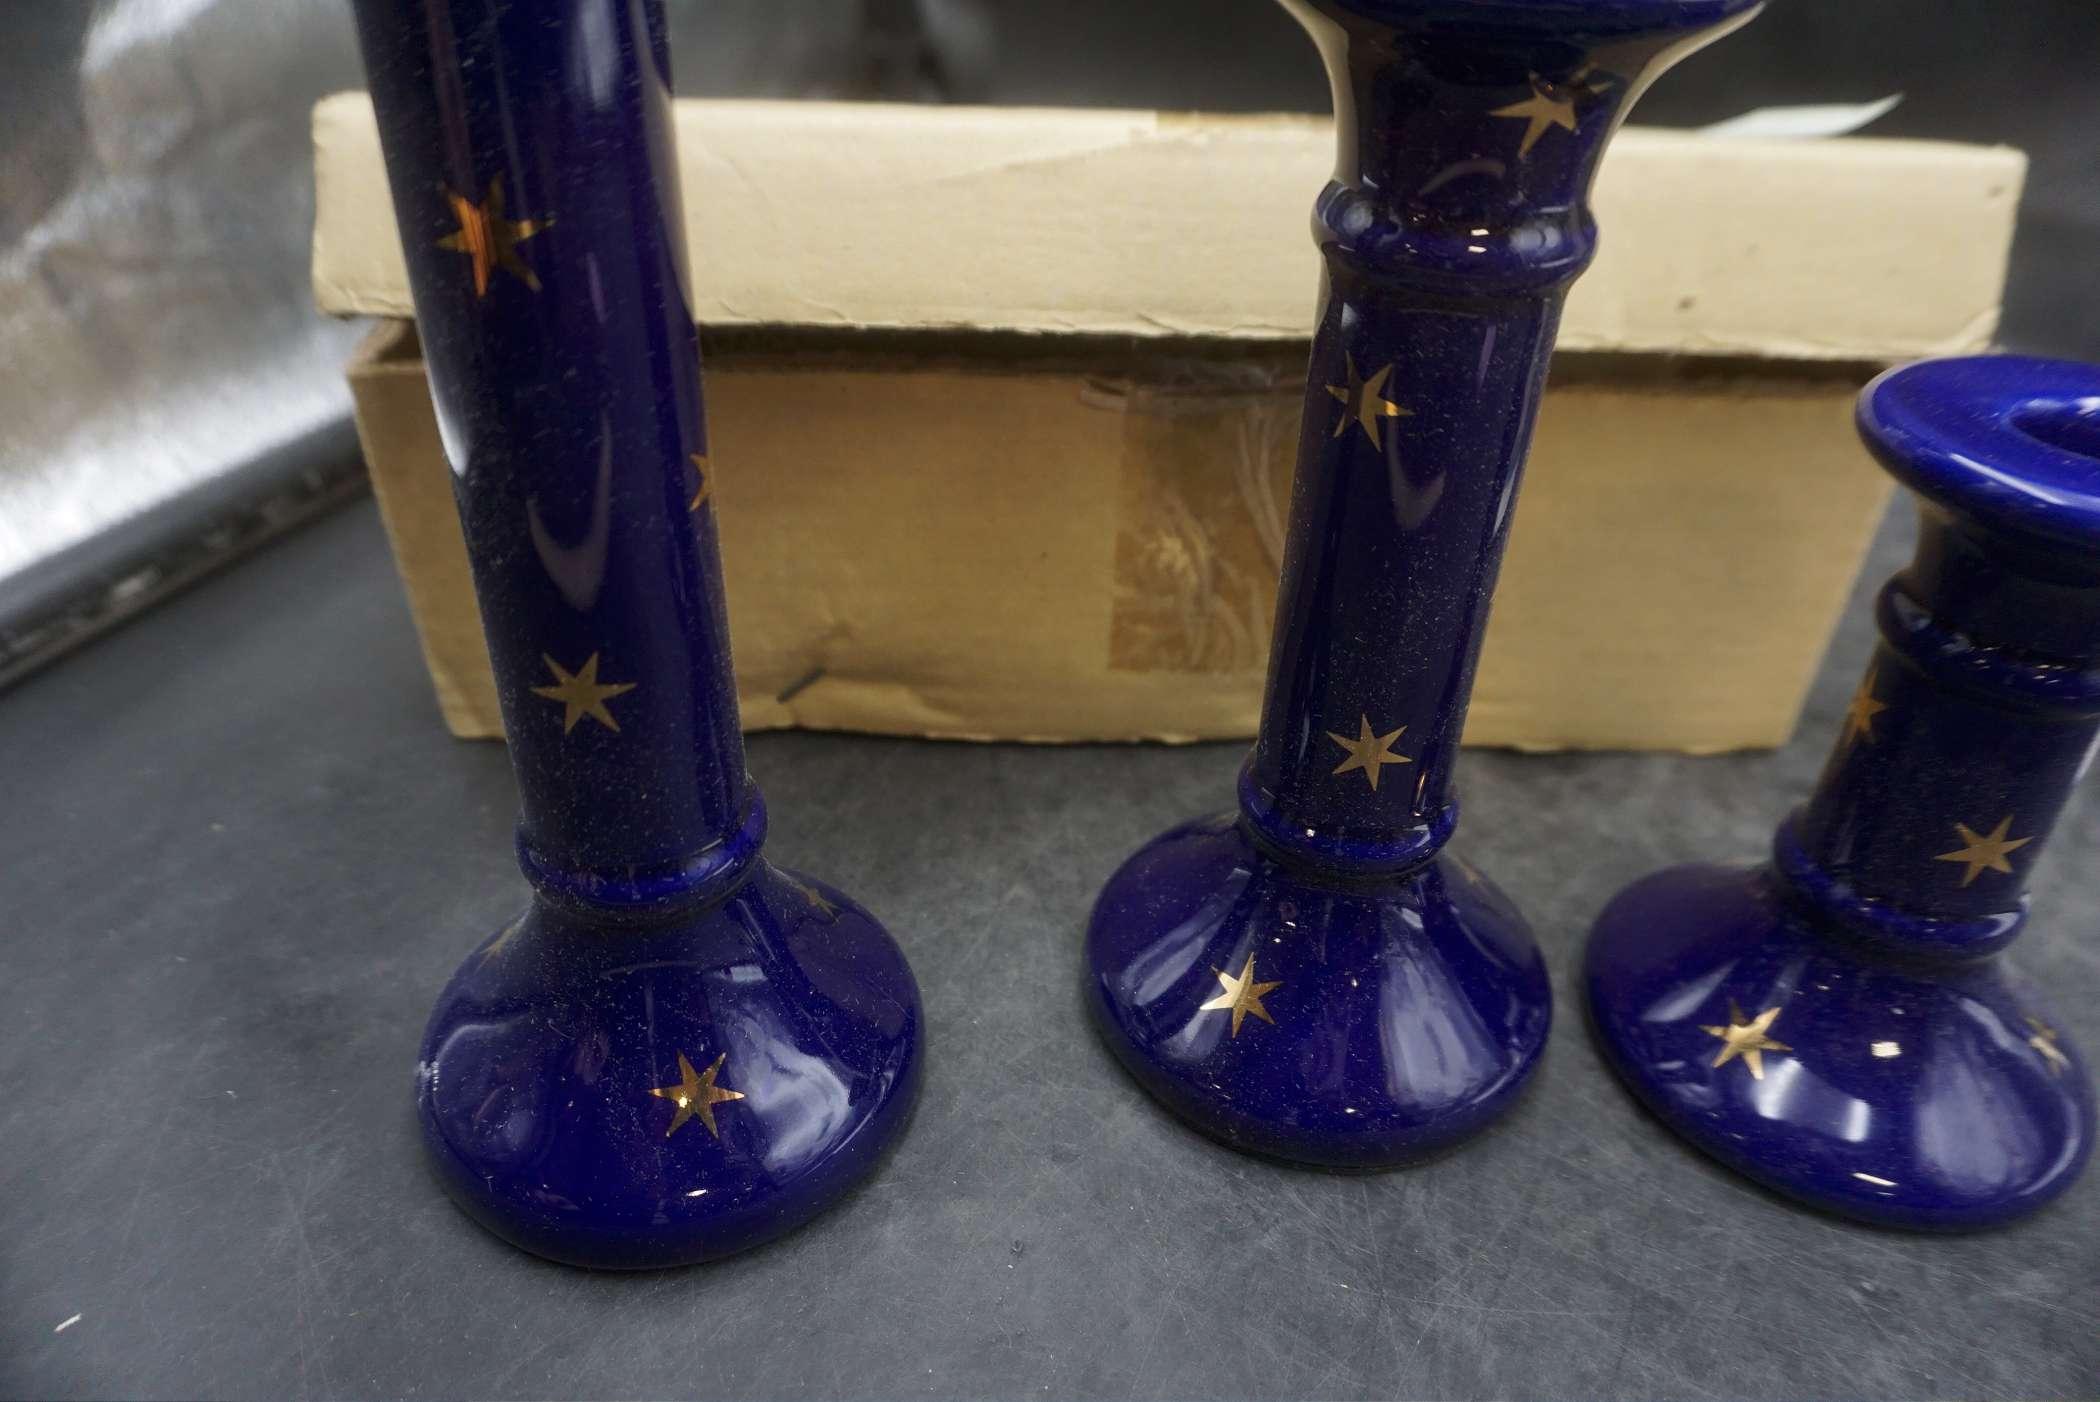 Blue Star Candlestick Holders & White Candlestick Holder (Made In Italy)